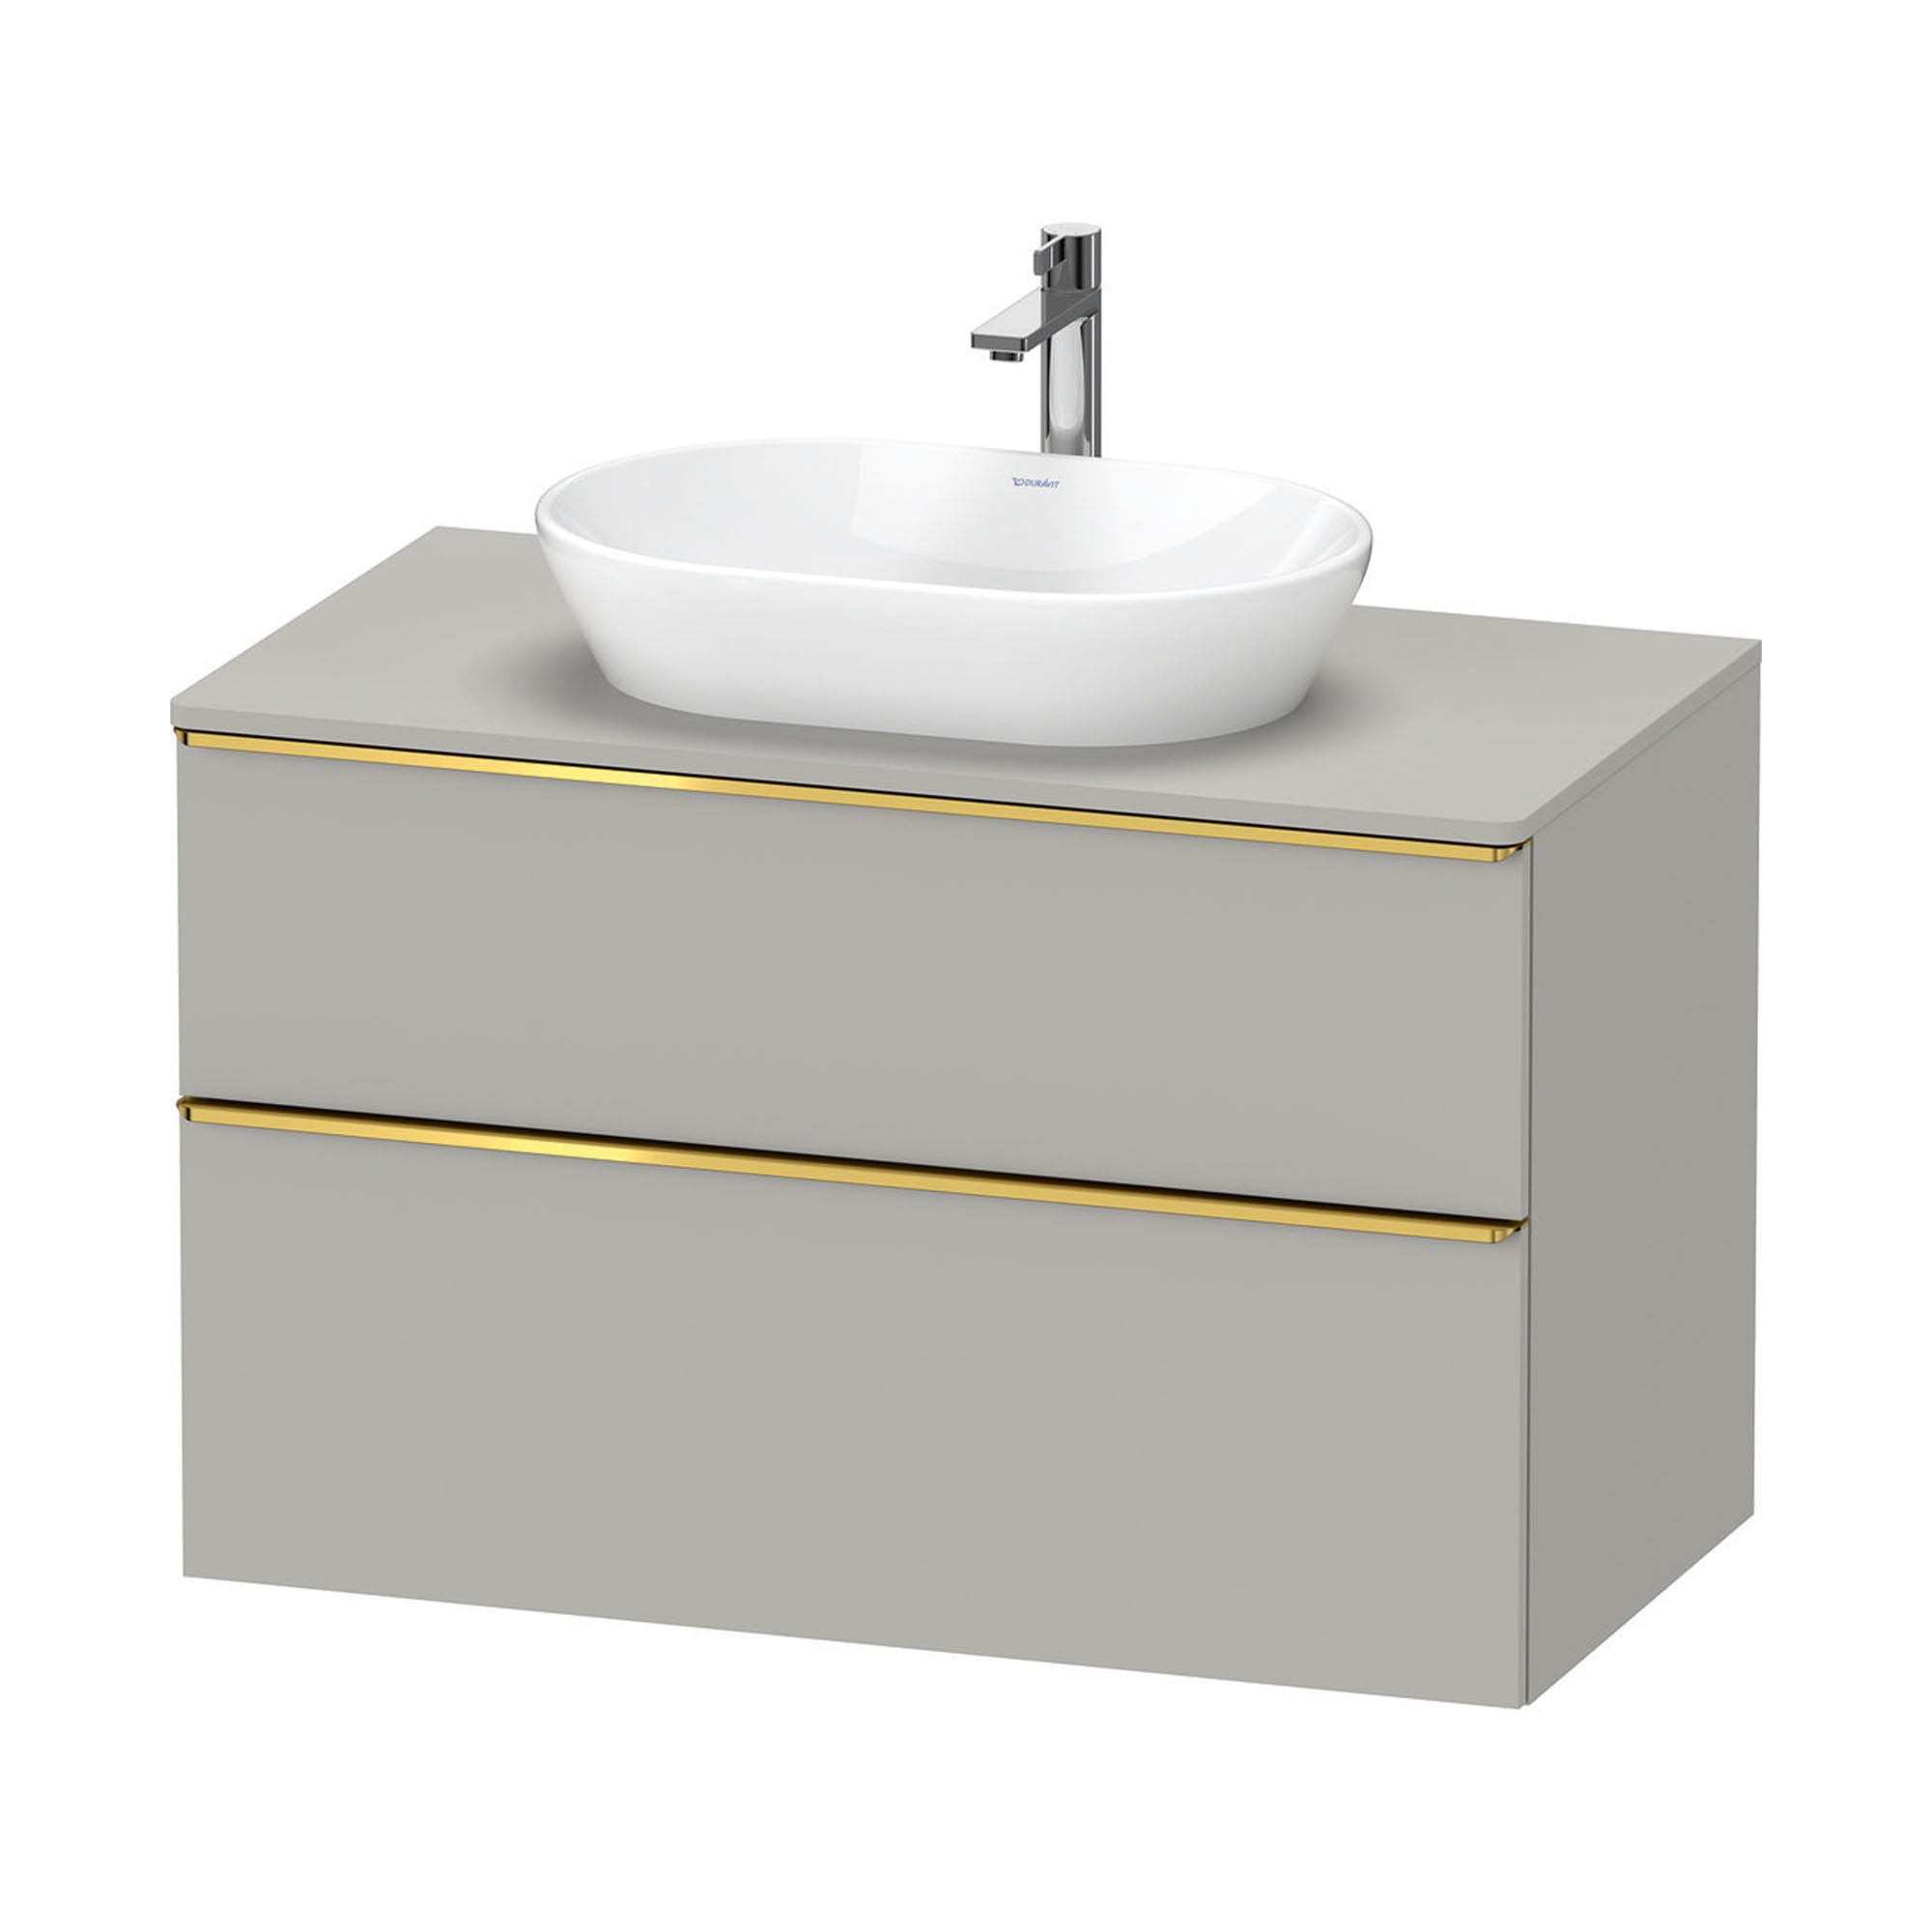 duravit d-neo 800 wall mounted vanity unit with worktop concrete grey gold handles